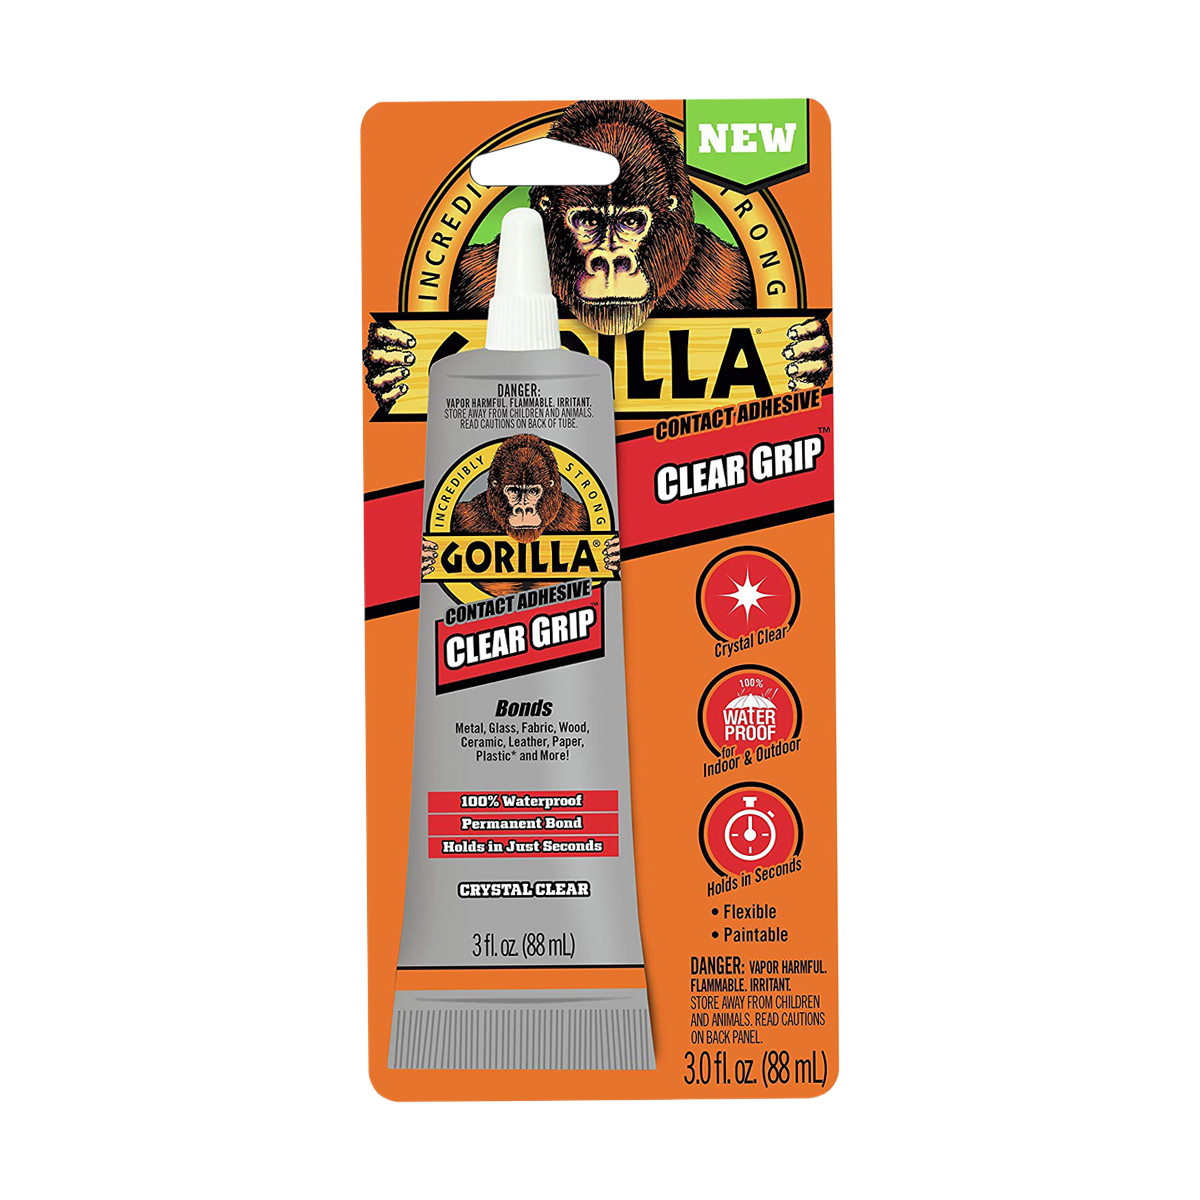 Gorilla Clear Grip Contact Adhesive - 3 oz